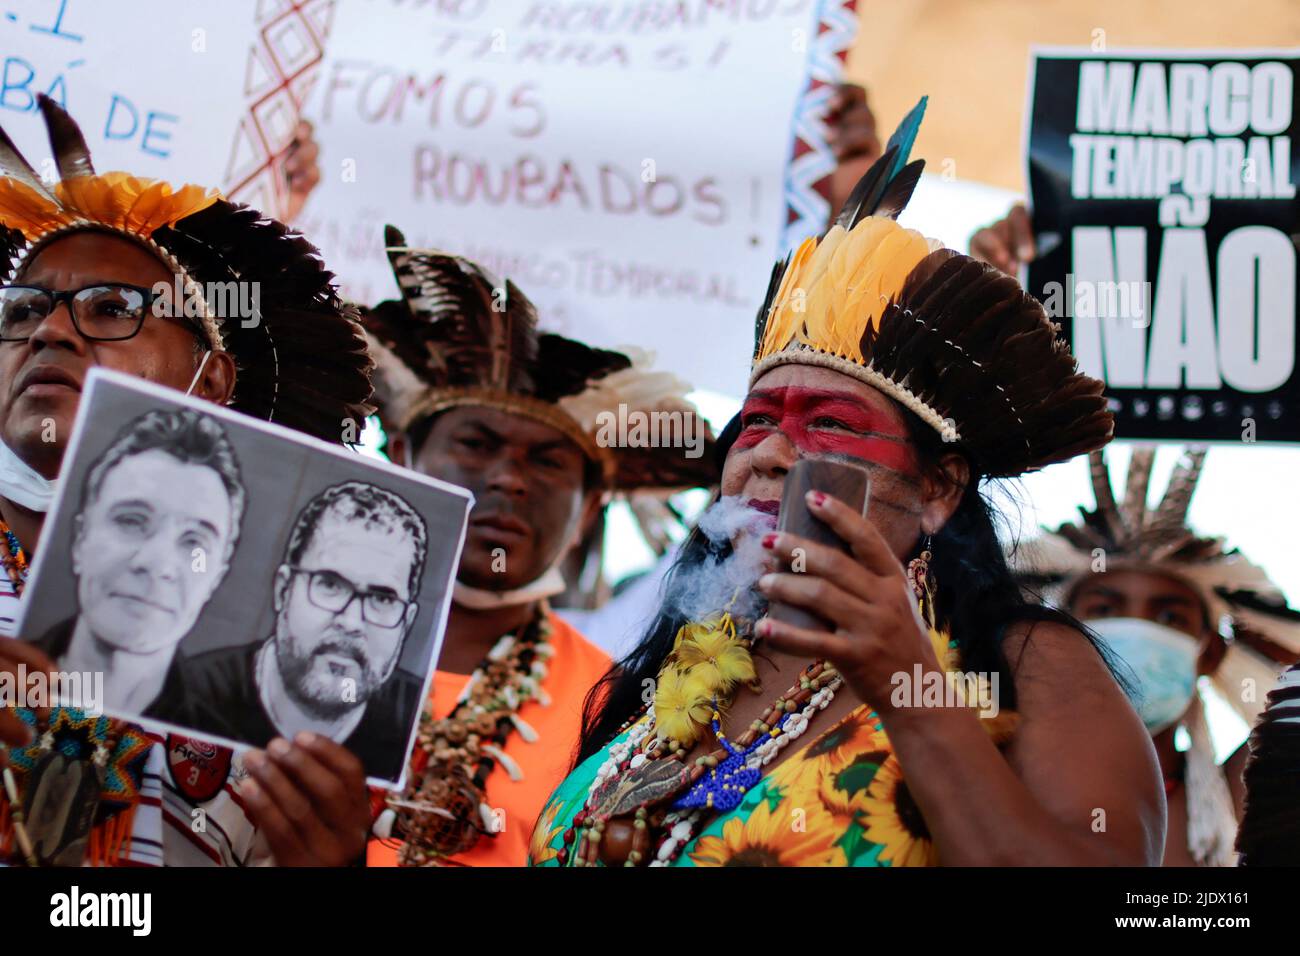 Indigenous people take part in a protest against Brazilian President Jair Bolsonaro's government, Brazil's National Indian Foundation (FUNAI)'s President Marcelo Augusto Xavier da Silva, to ask the Supreme Court to define the demarcation of Indigenous lands and to demand justice for journalist Dom Phillips and indigenous expert Bruno Pereira, who were murdered in the Amazon, in Brasilia, Brazil, June 23, 2022. REUTERS/Ueslei Marcelino Stock Photo